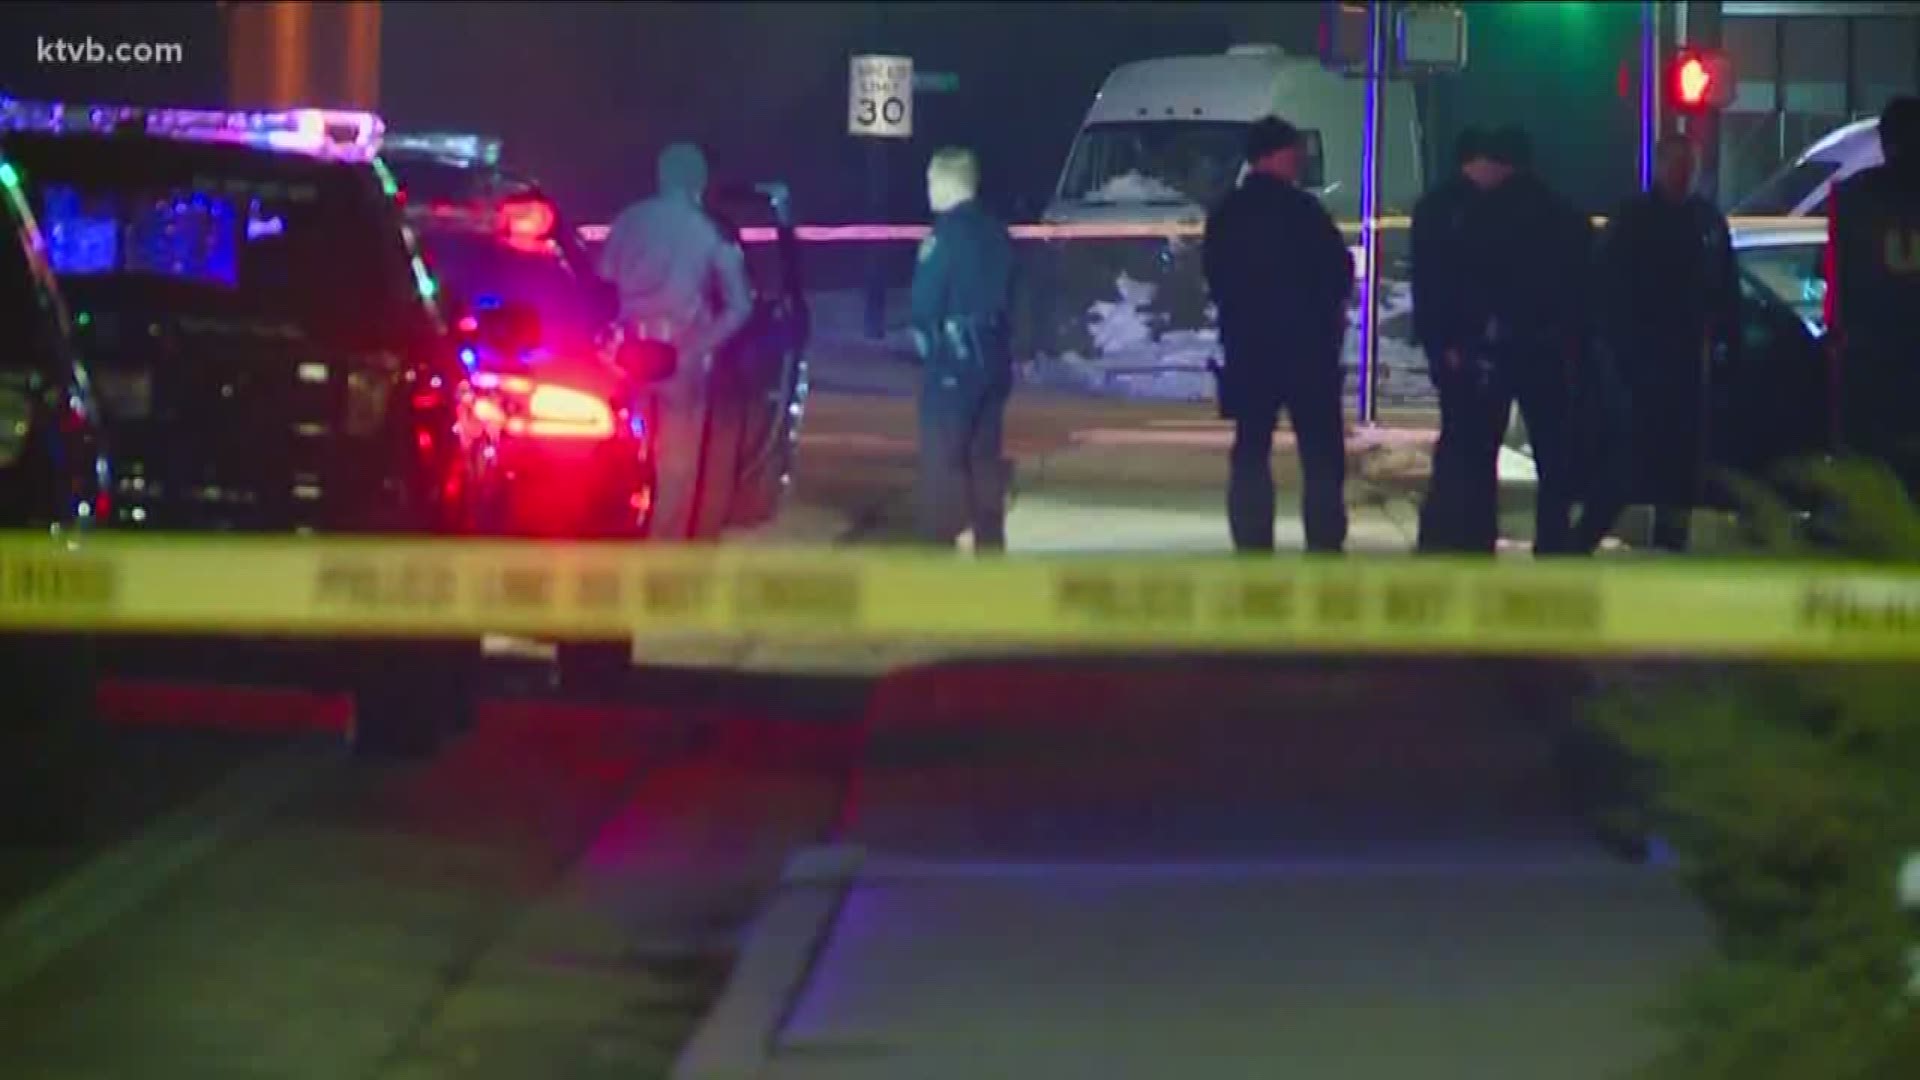 Boise Police say one suspect died in an officer-involved shooting after a traffic stop turned violent